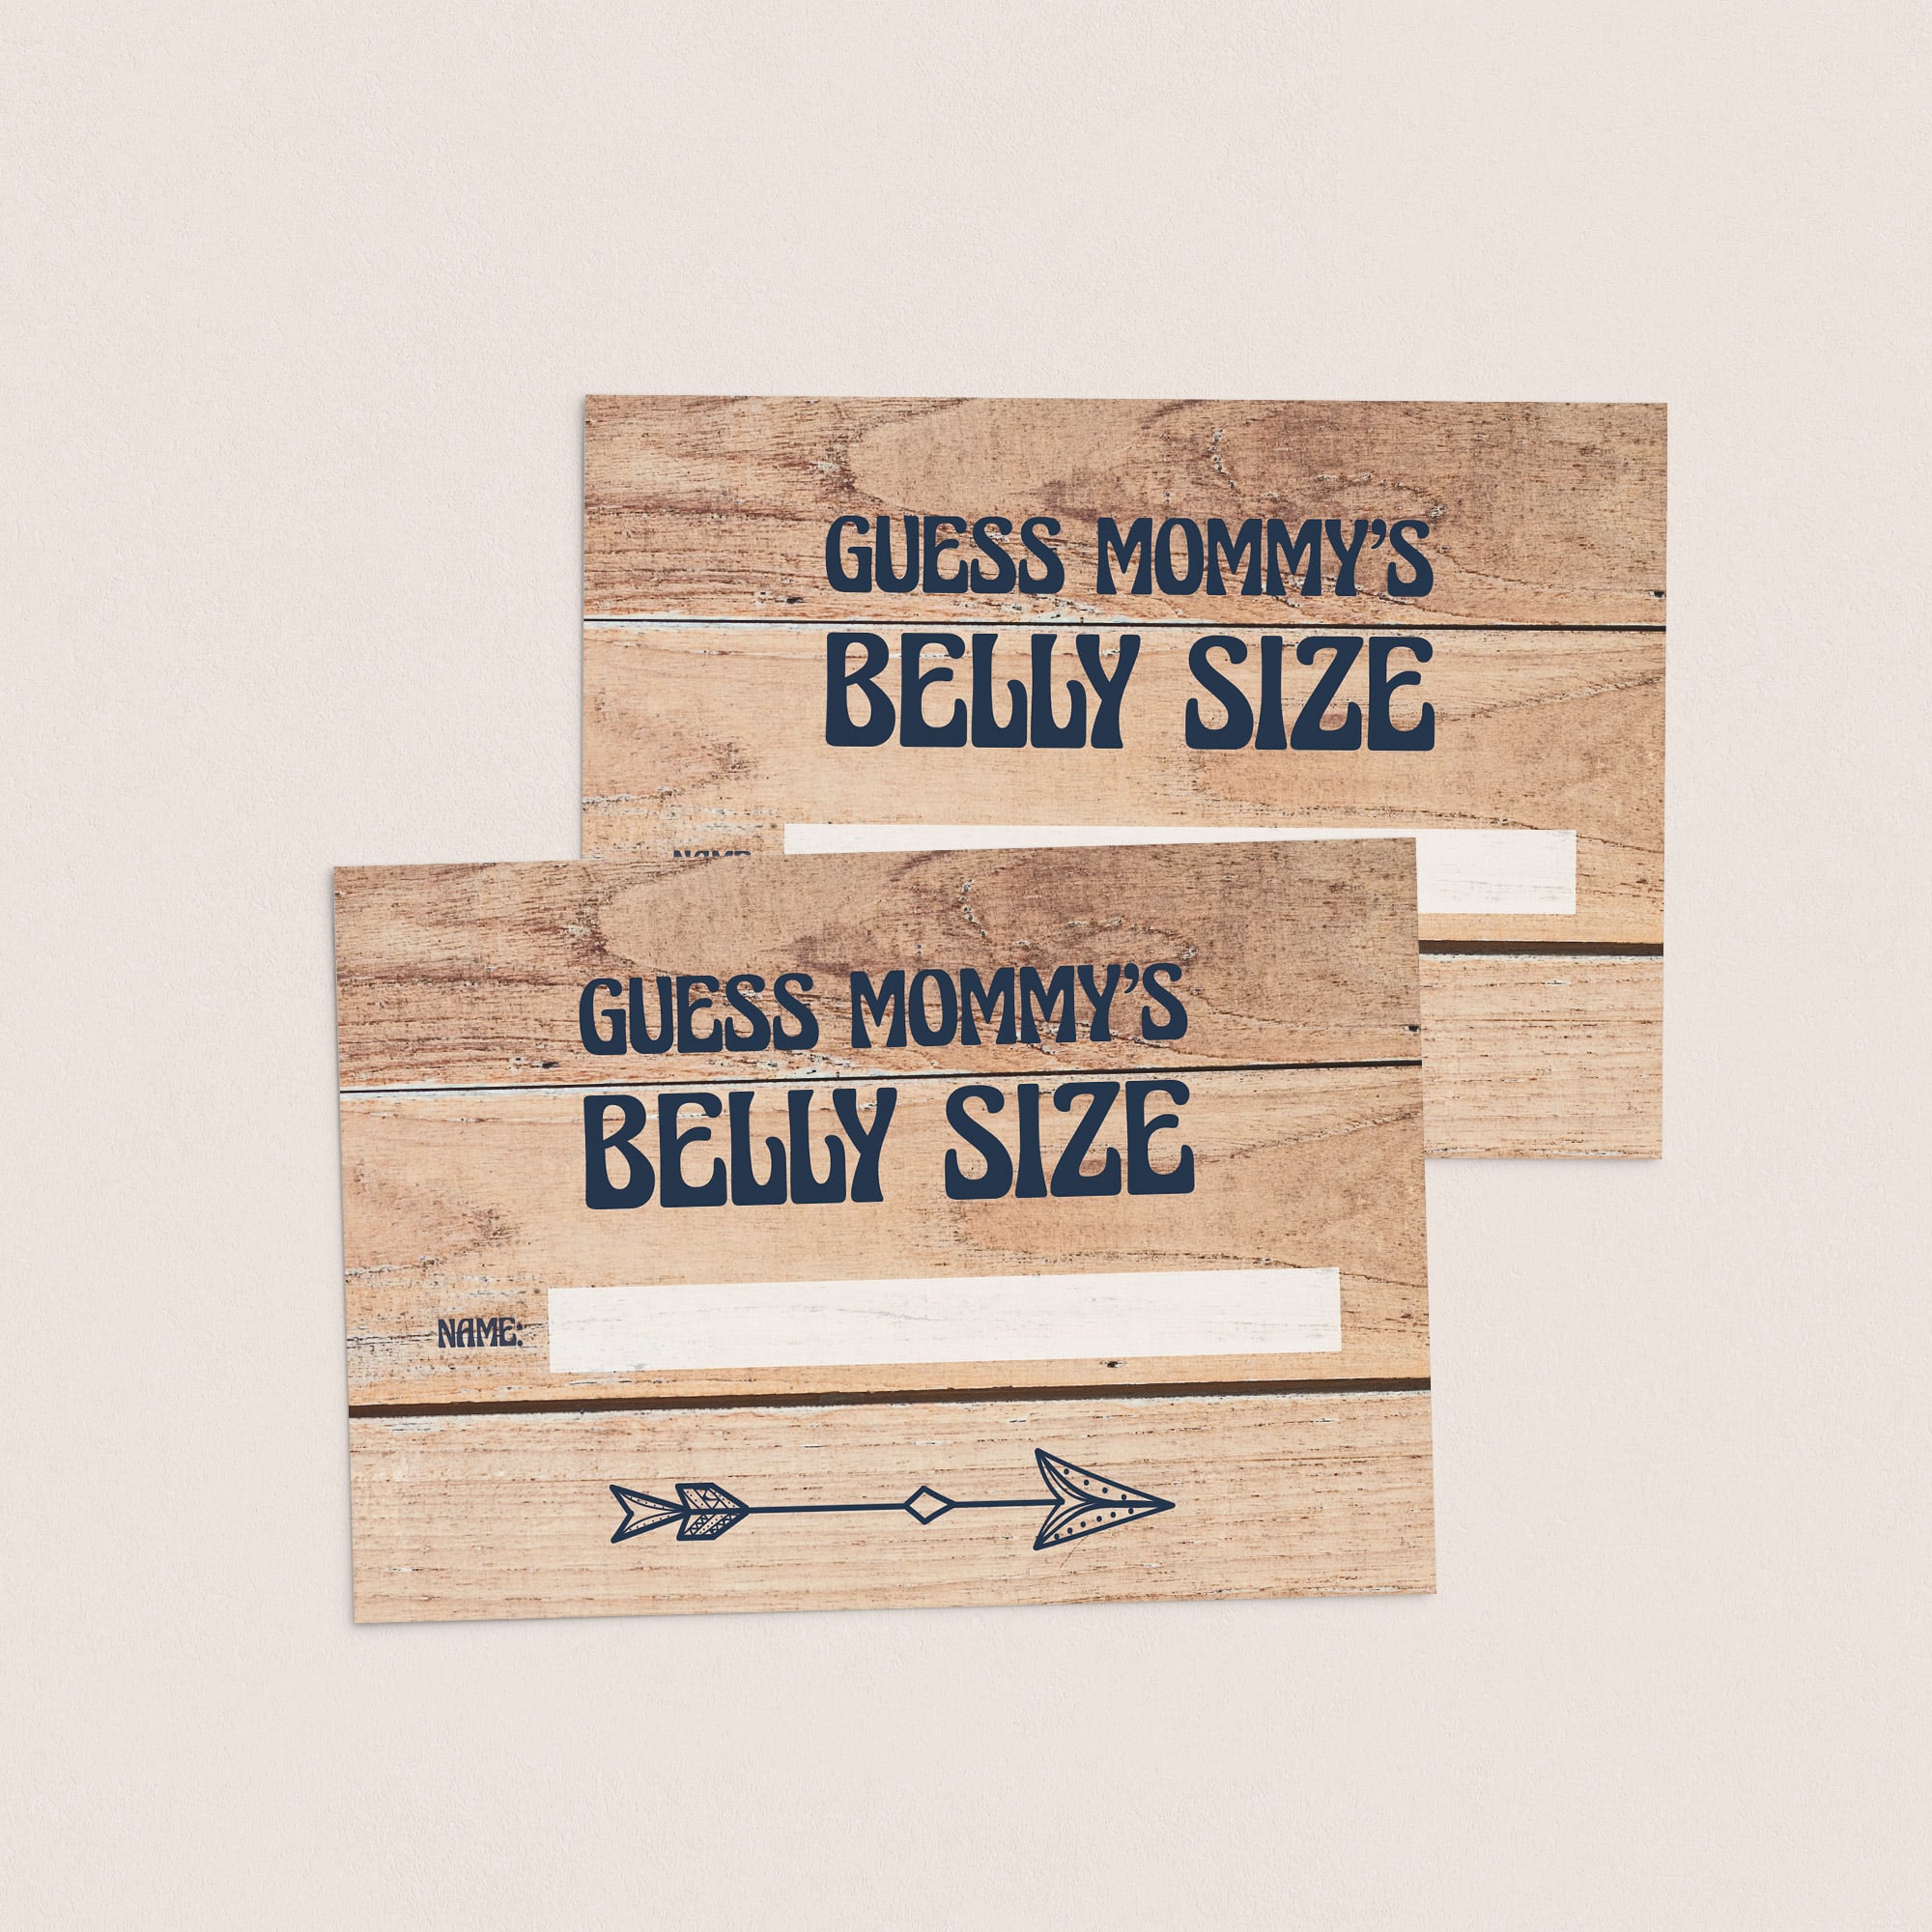 Guess mommy's bump size cards printable by LittleSizzle